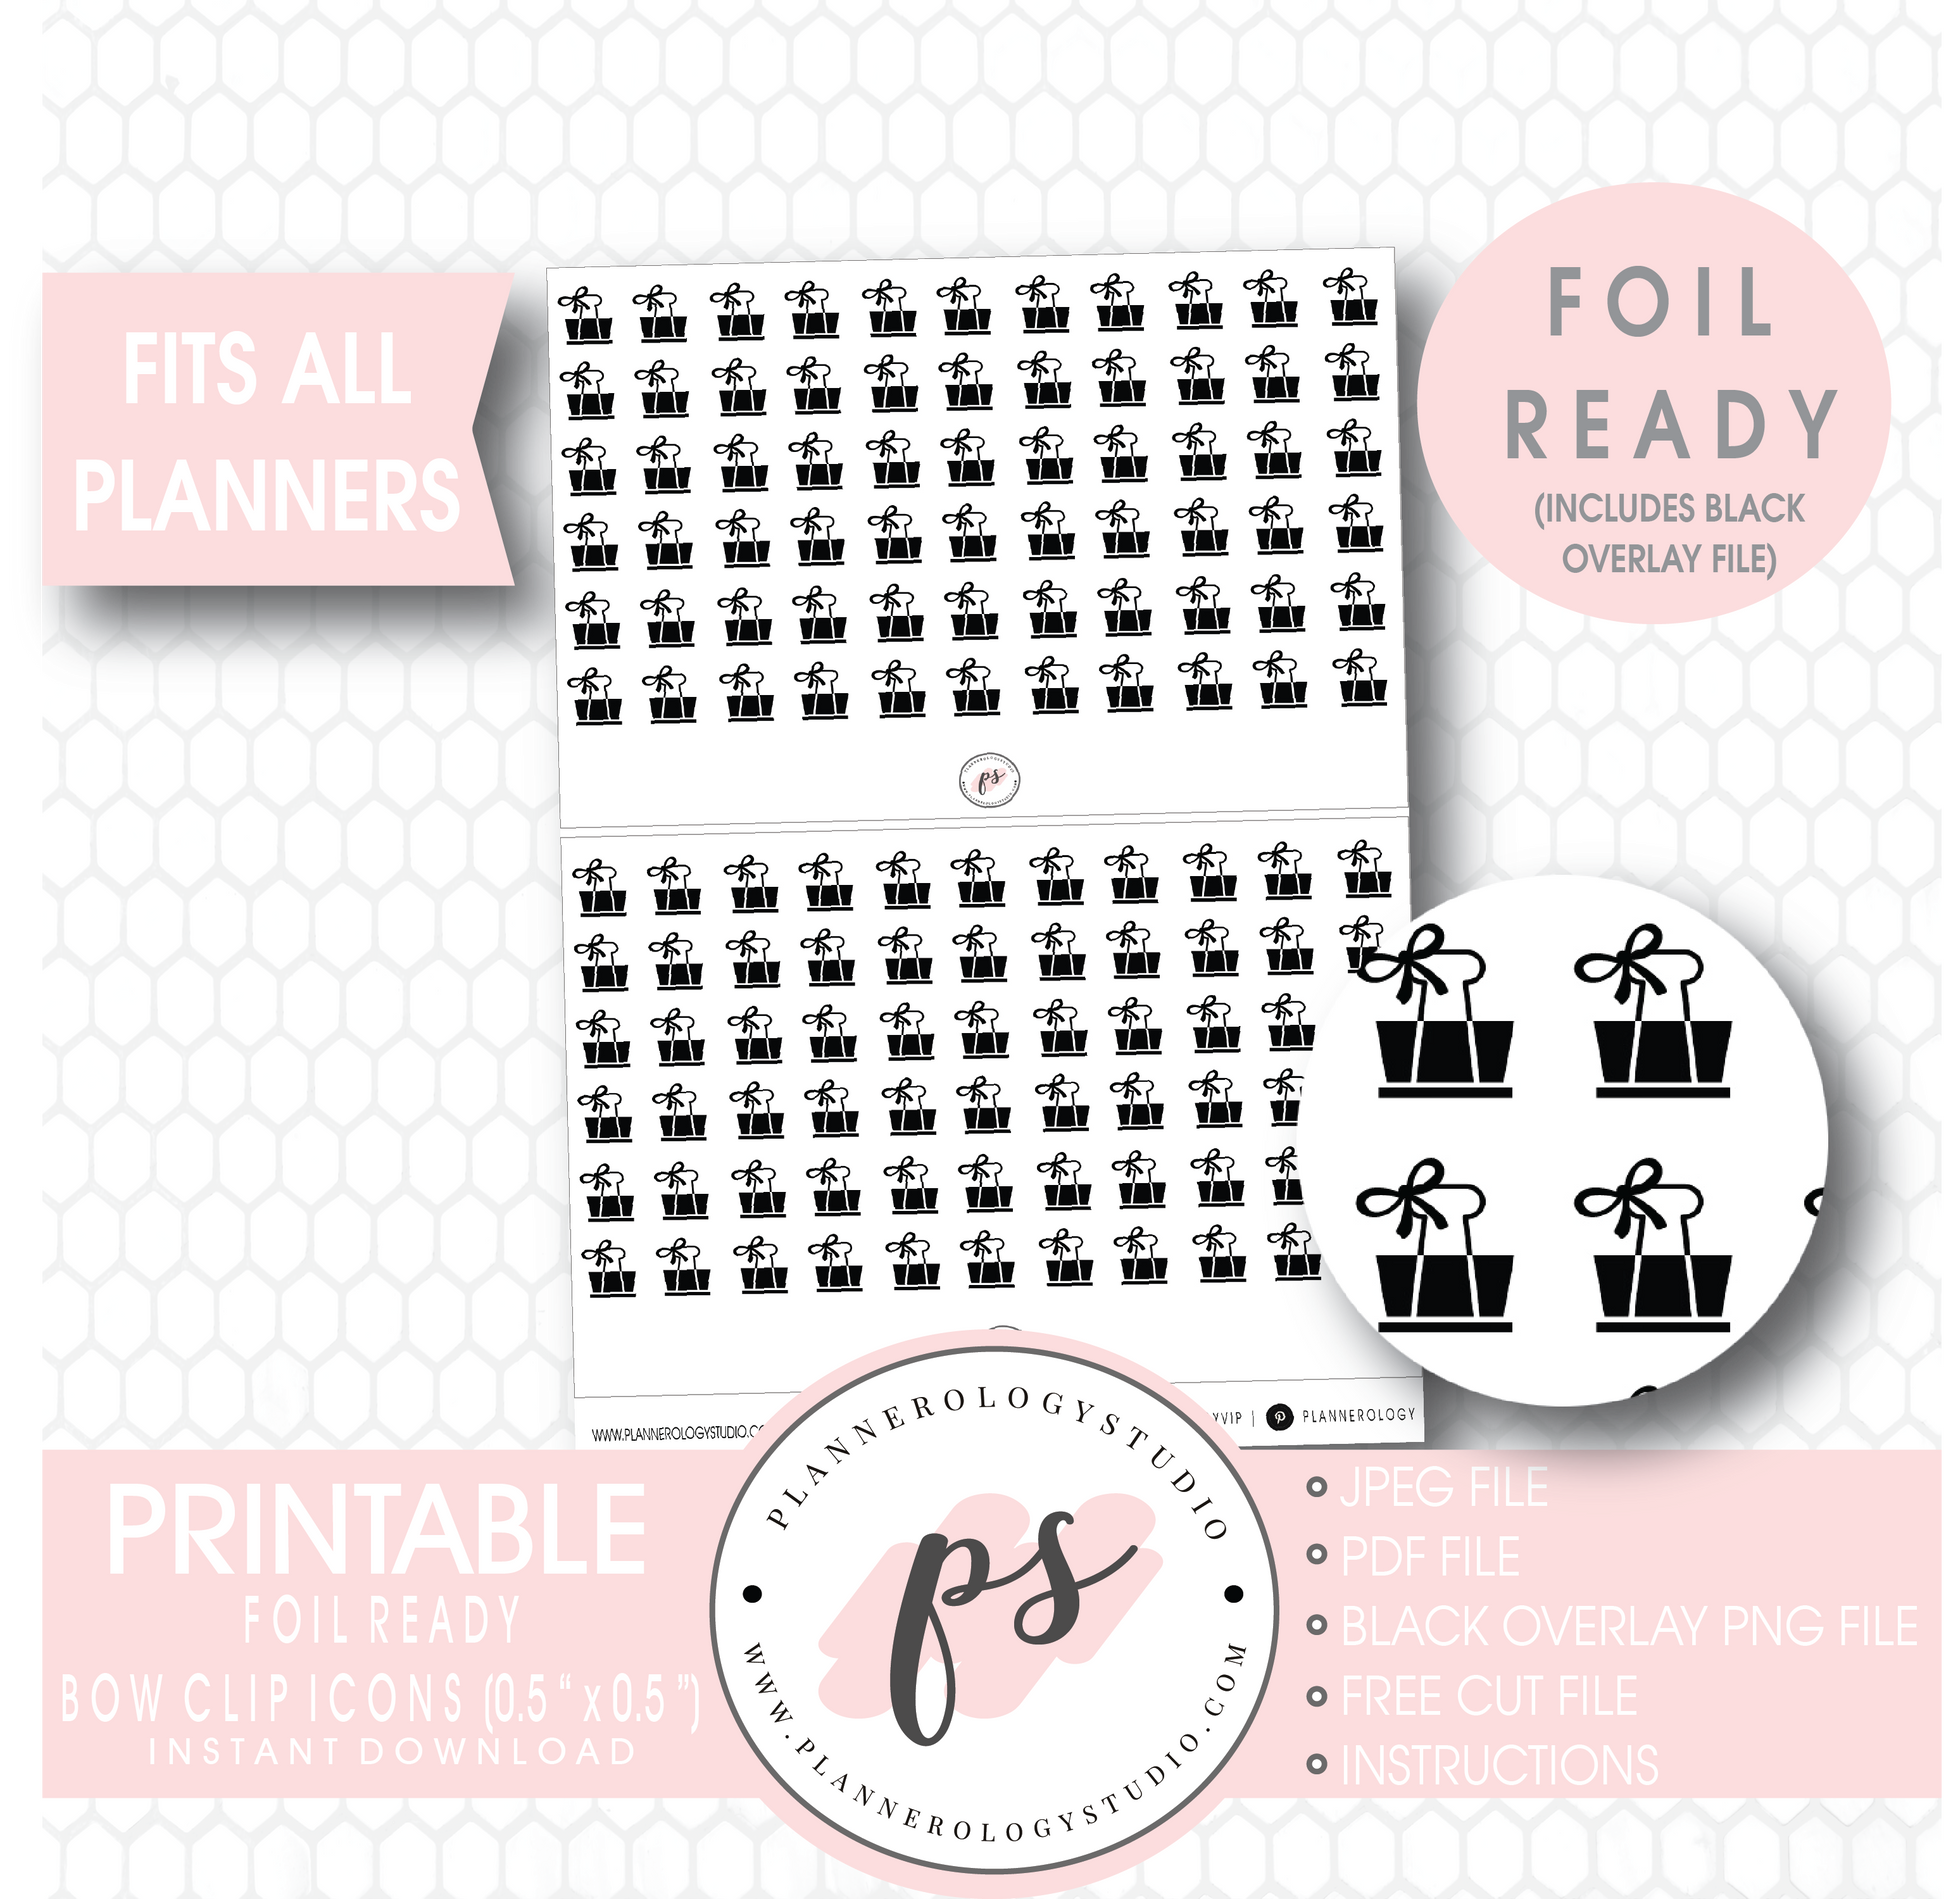 Bow Clip Icon Digital Printable Planner Stickers (Foil Ready) - Plannerologystudio